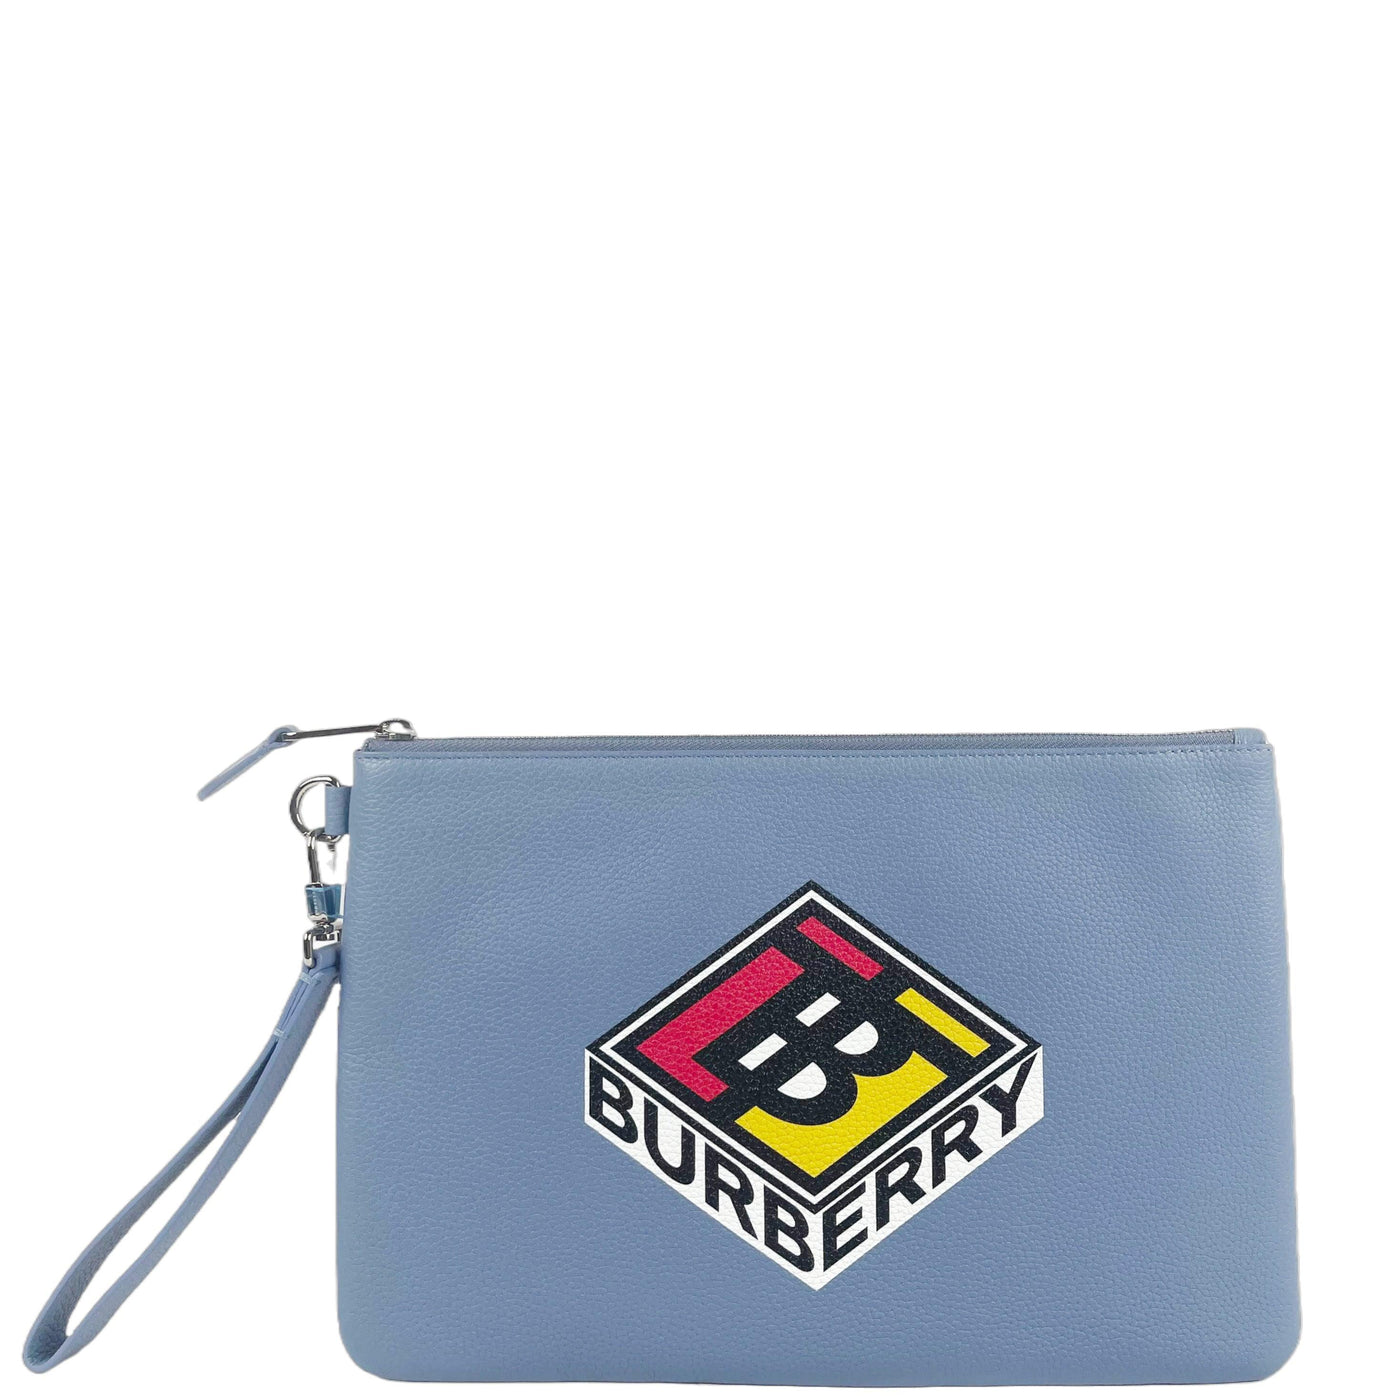 Burberry Graphic Logo Clutch Pouch Bag